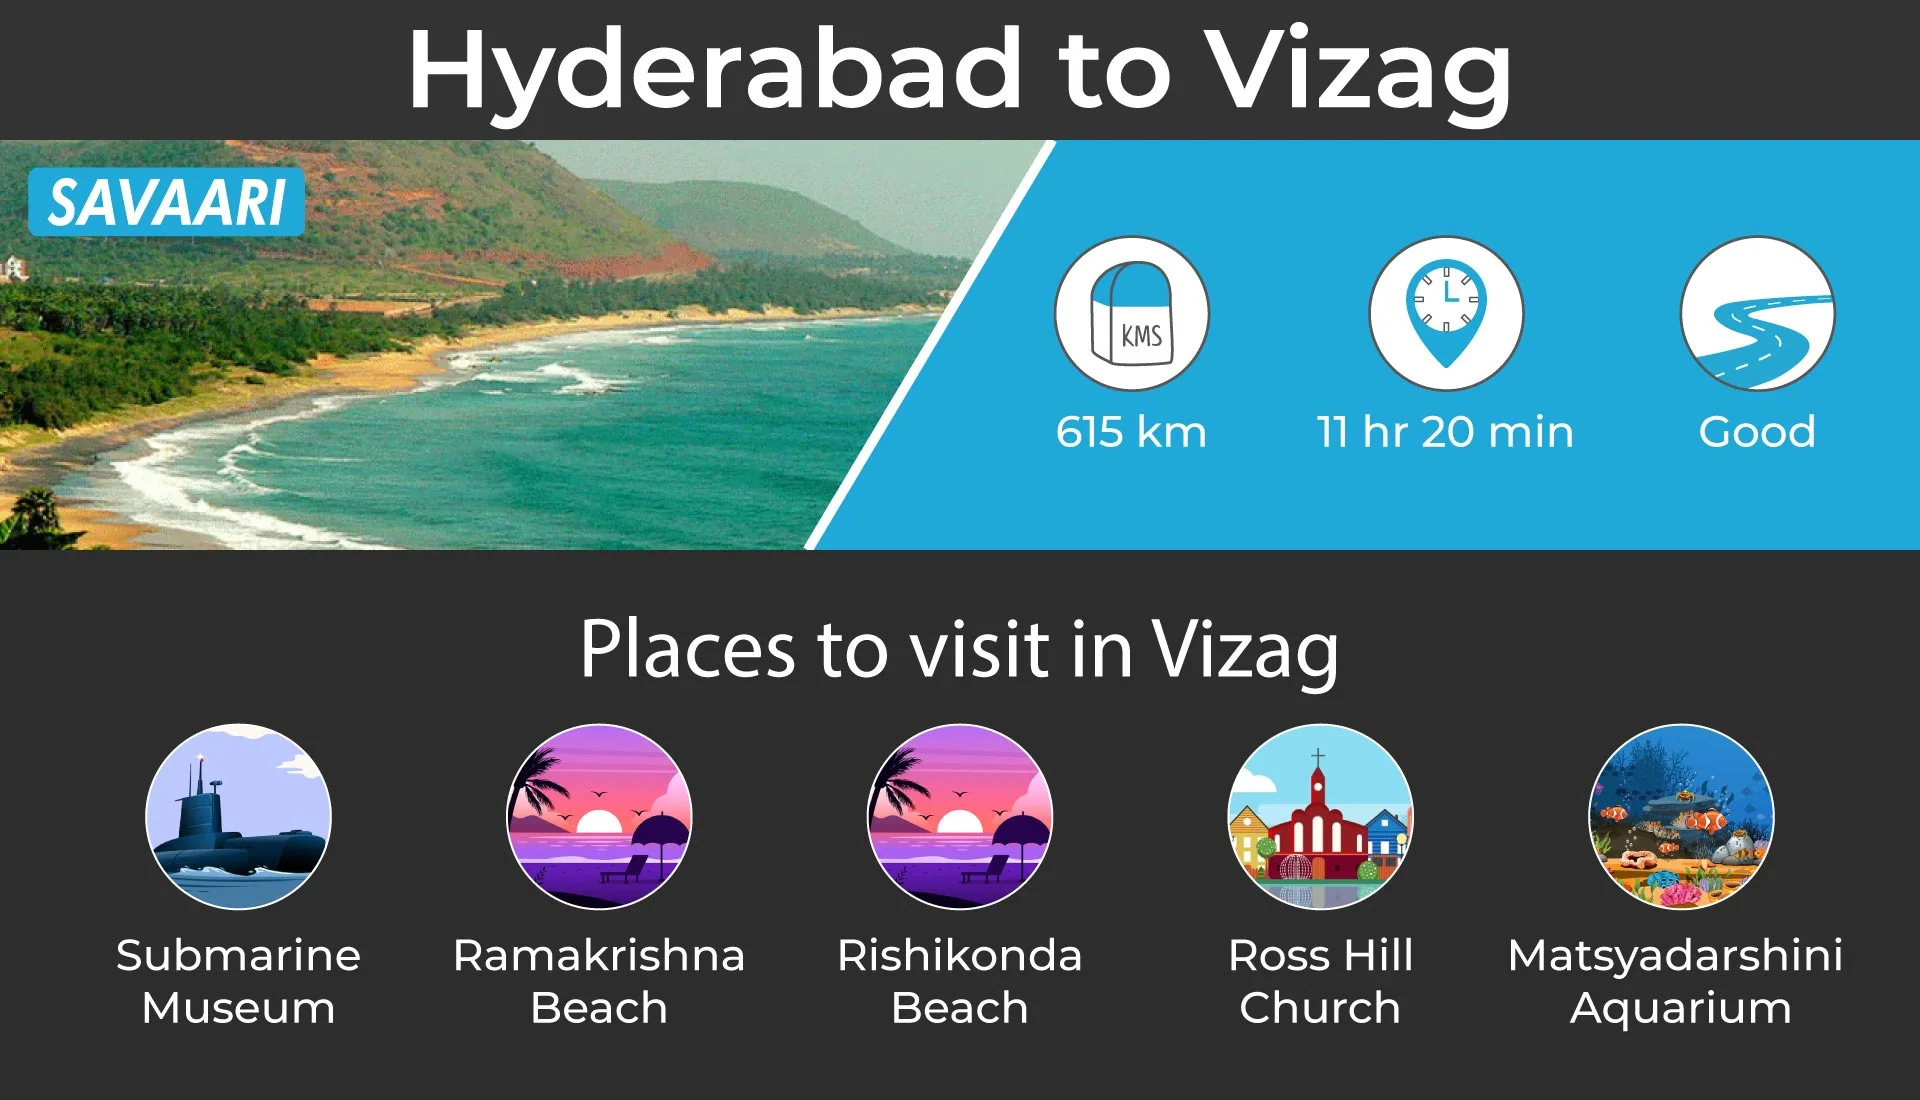 Hyderabad to vizag a beautiful road trip